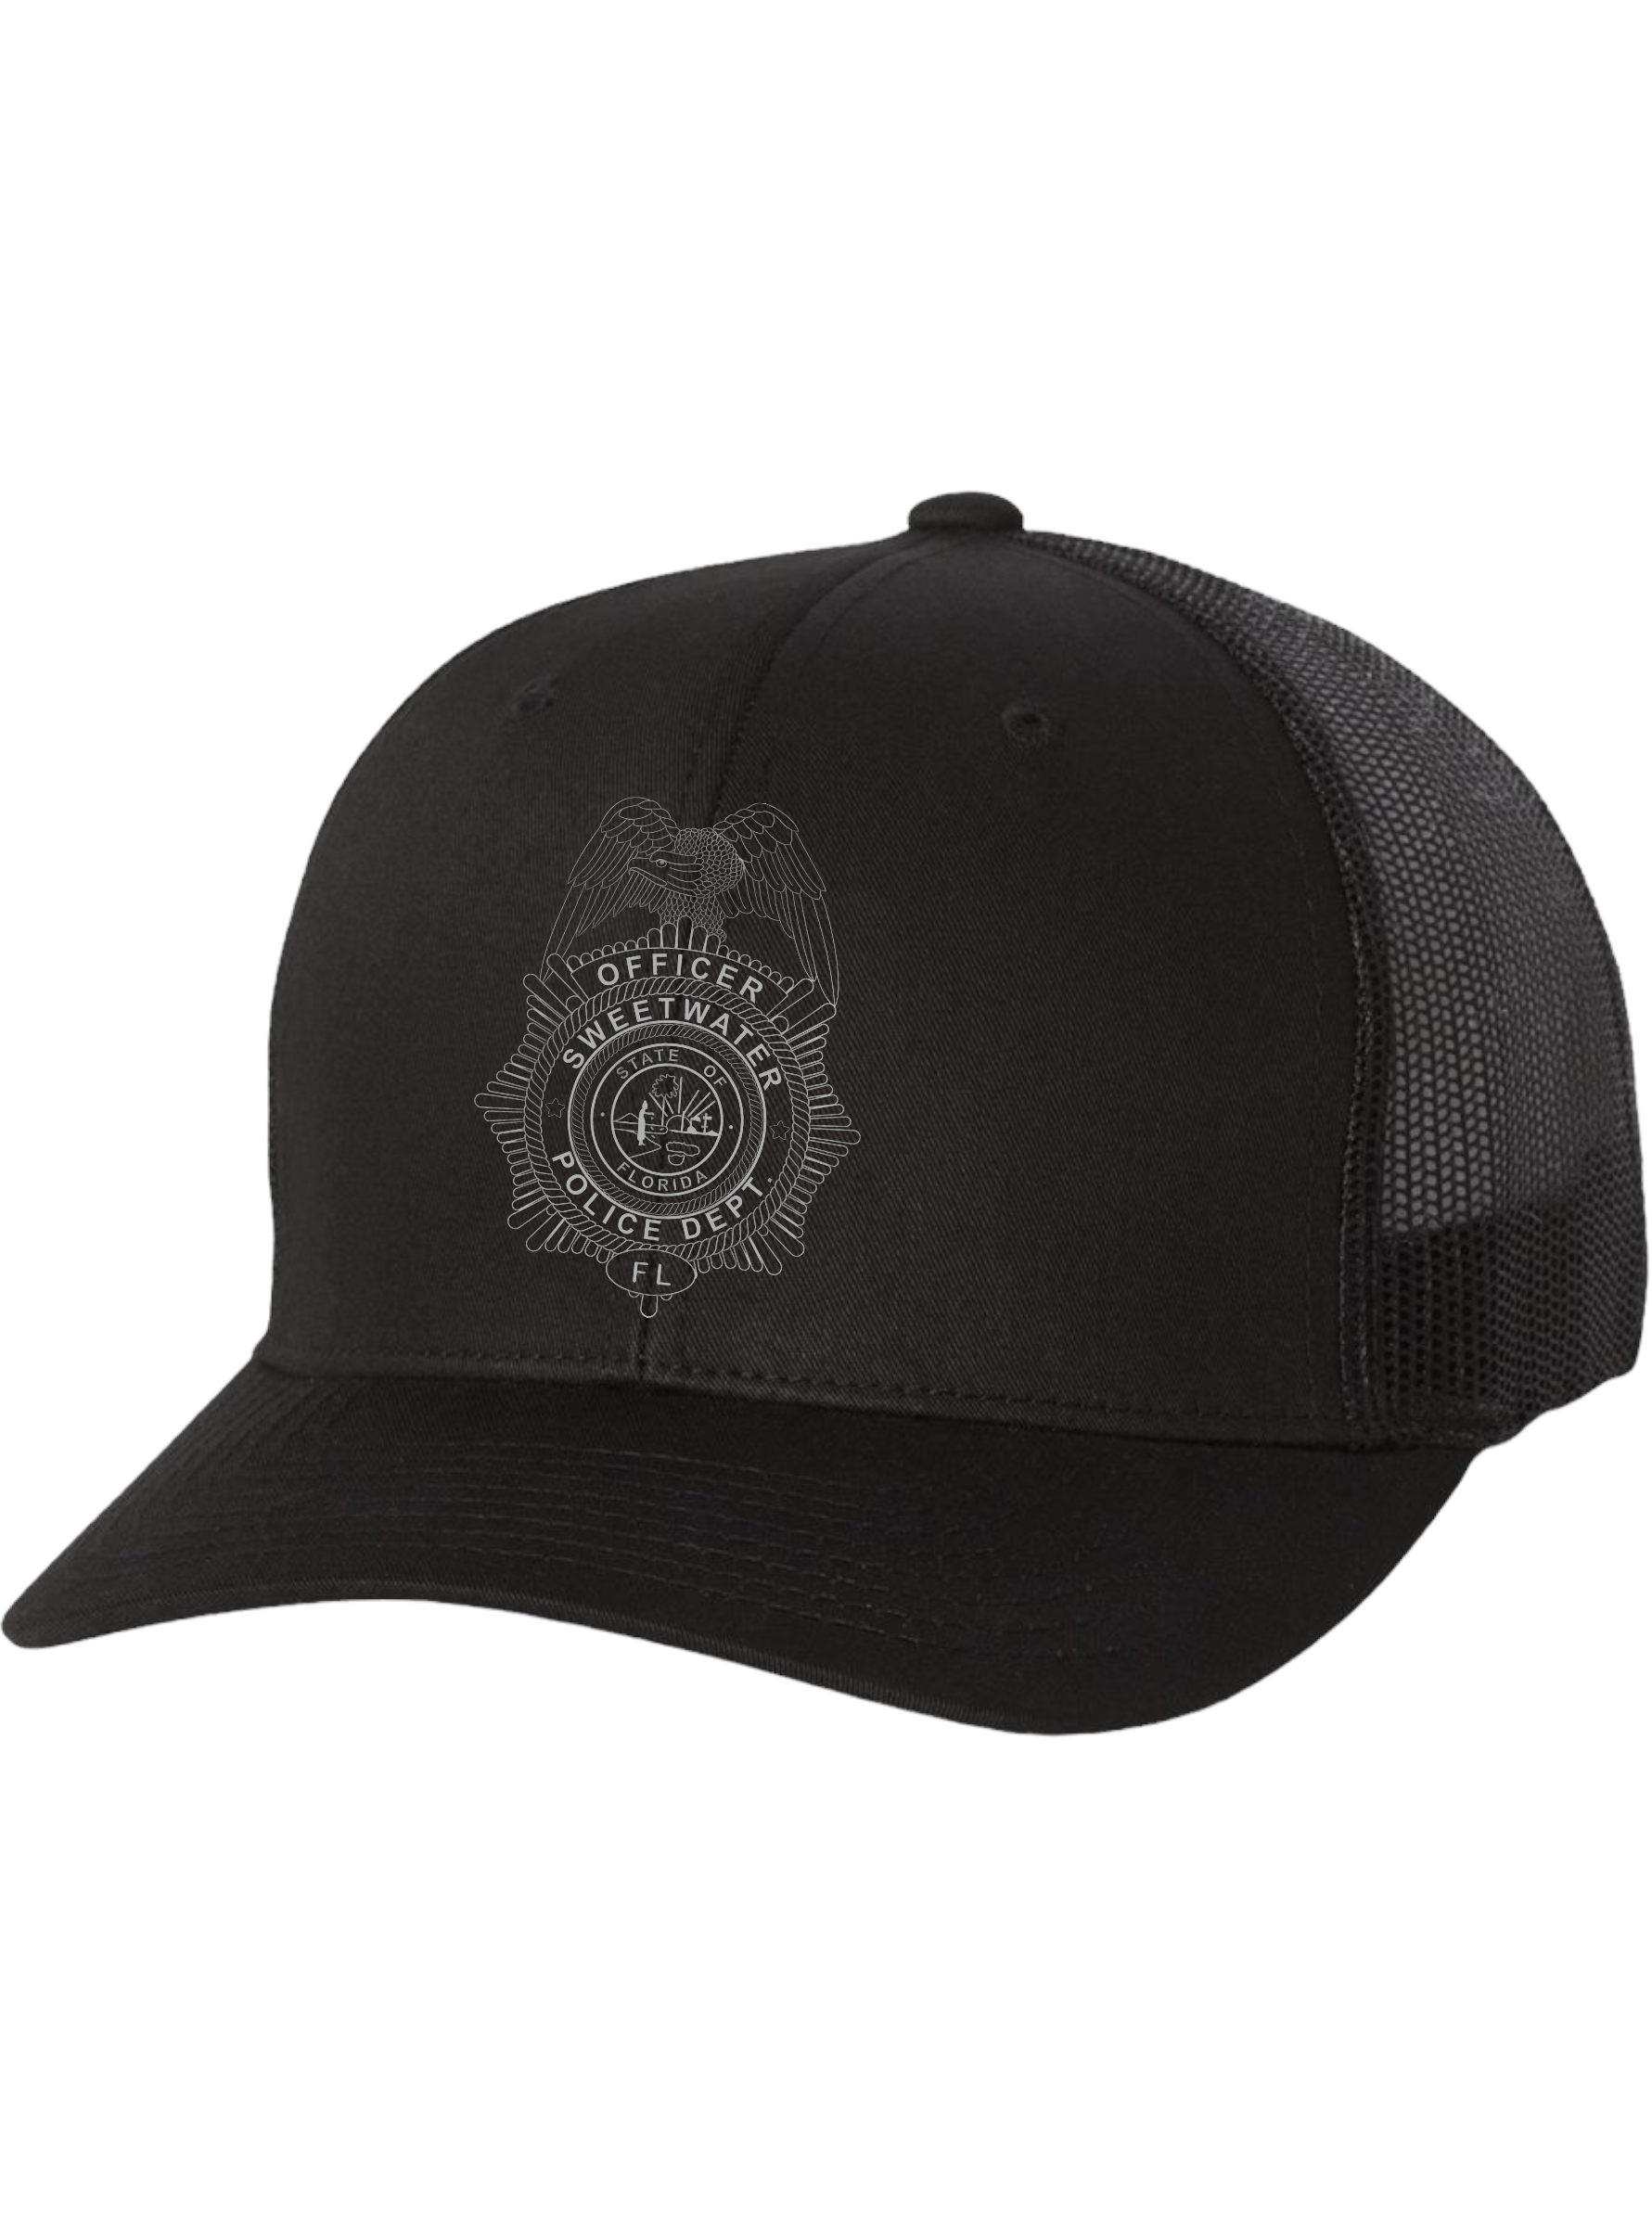 Sweetwater Police Department Snap Back Retro Hat